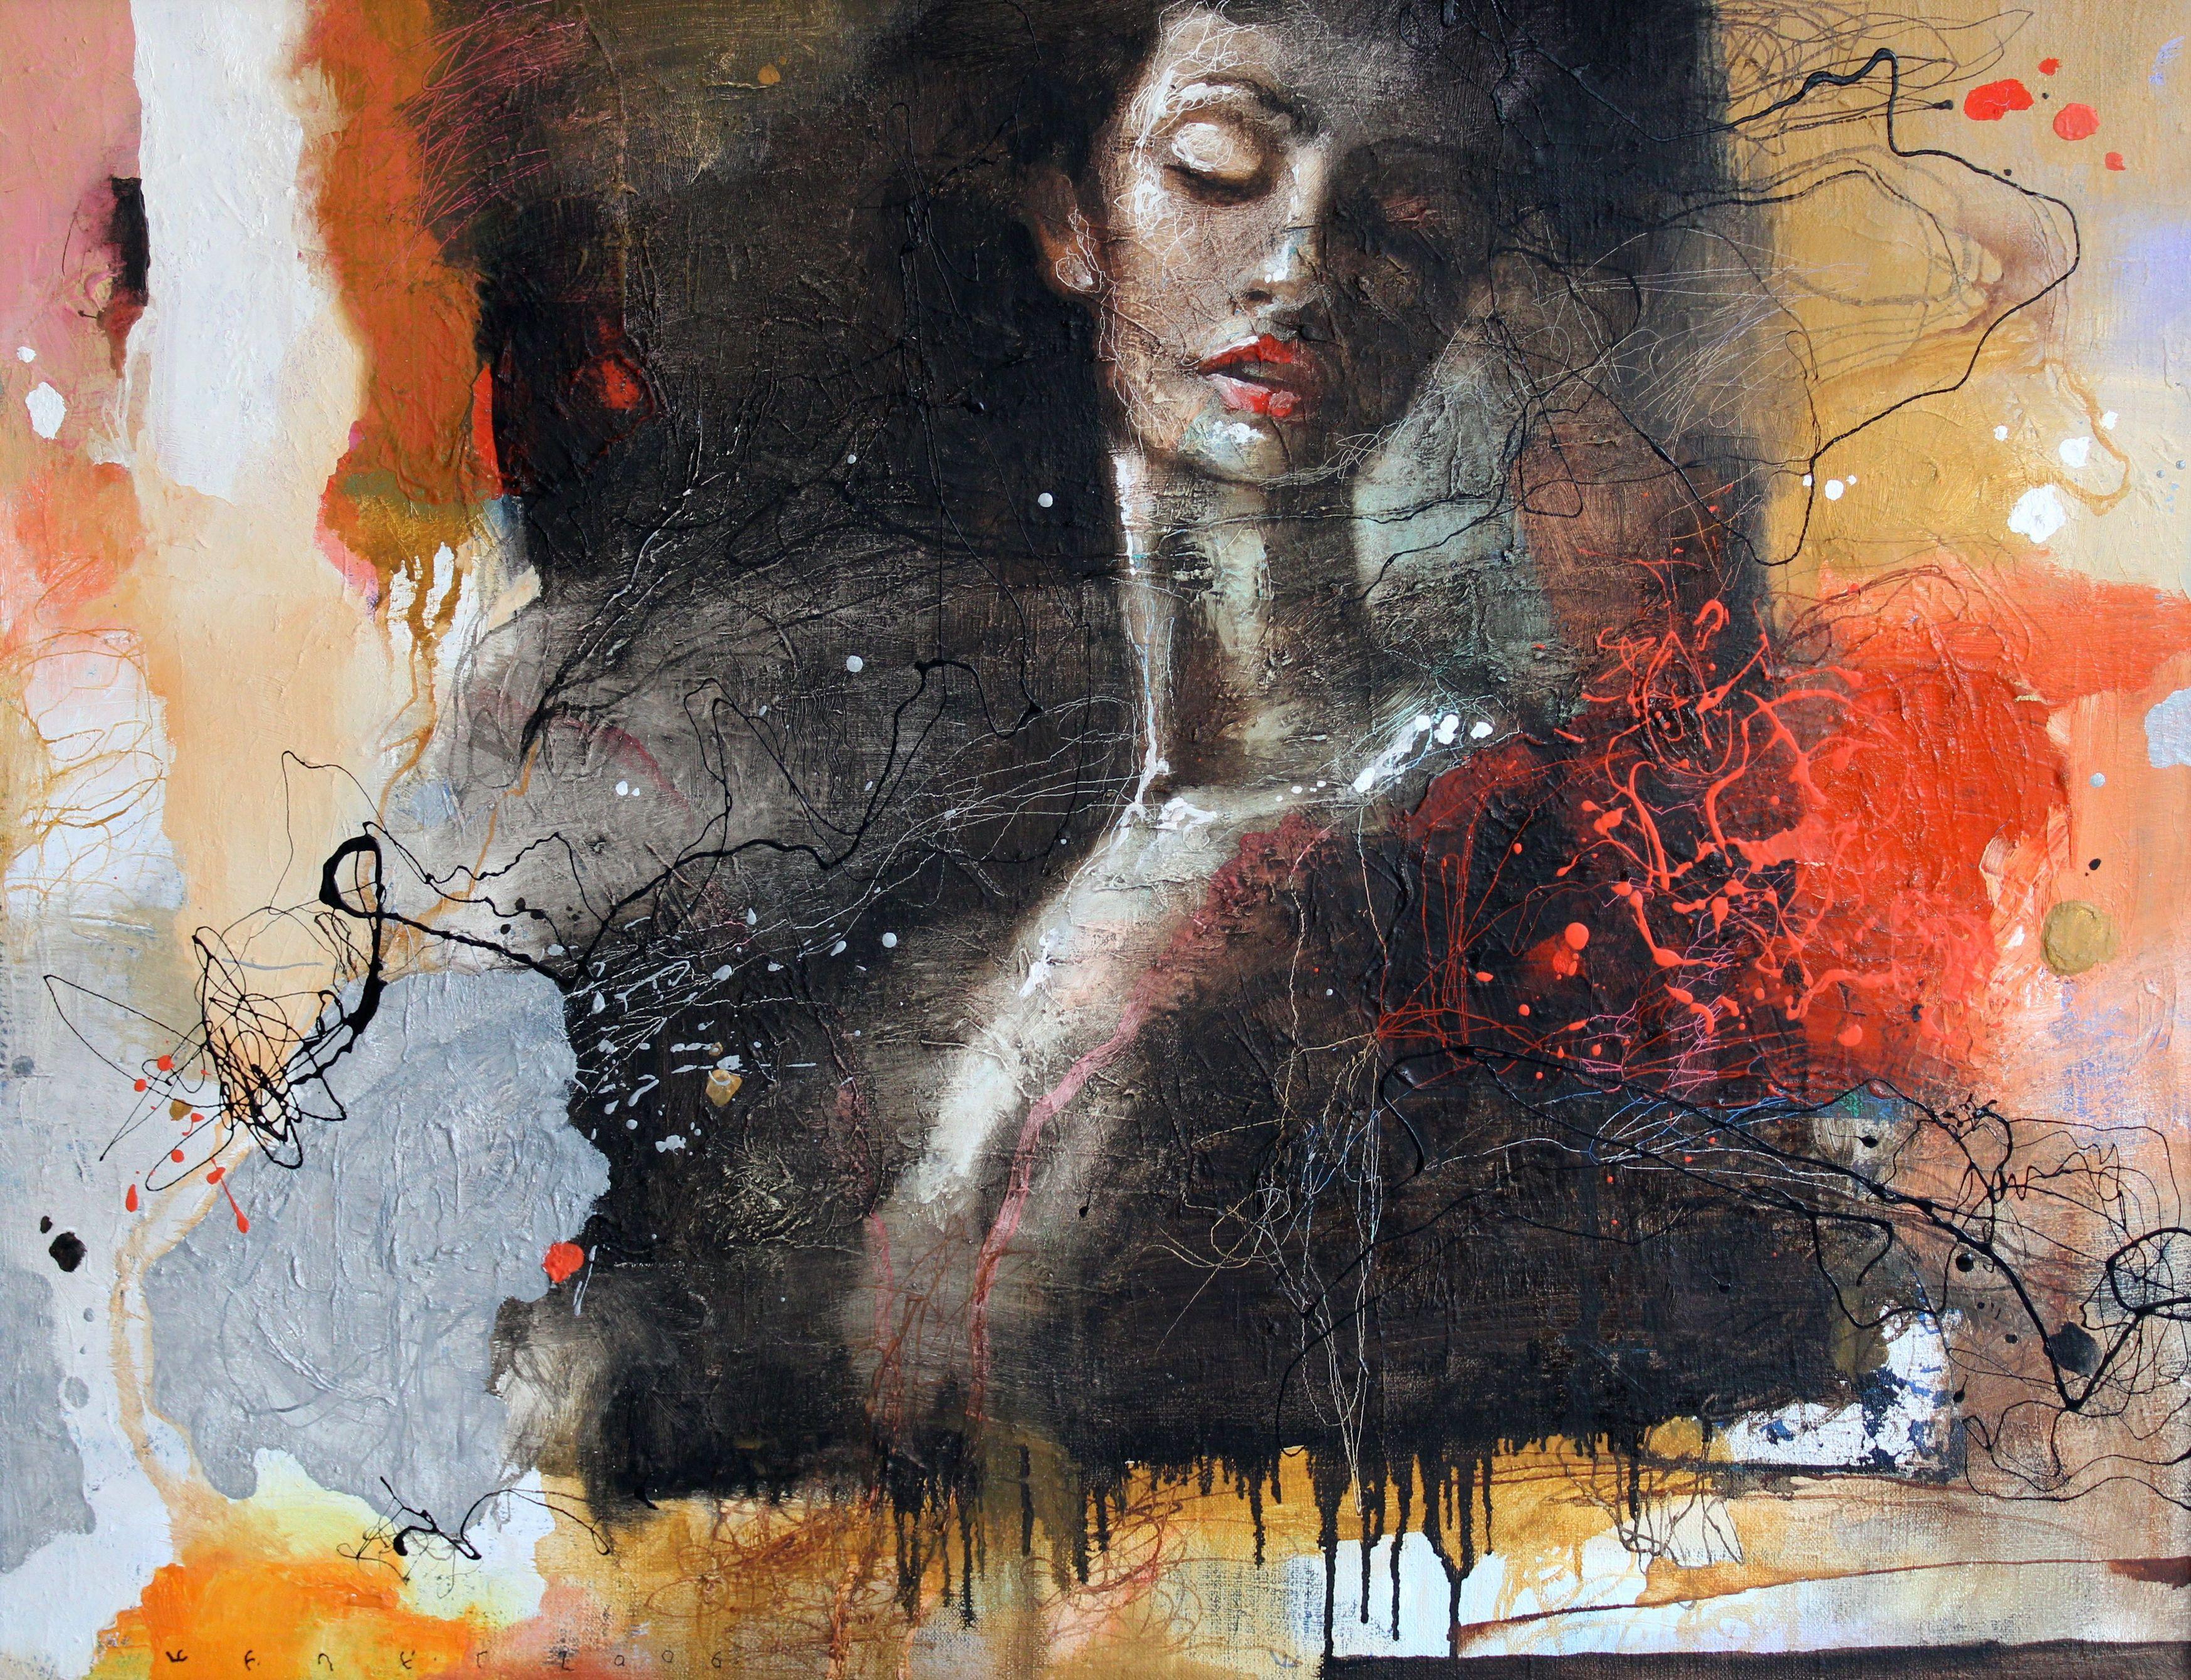 Sublimation or weightlessness. 2006, canvas, oil, 70x90 cm